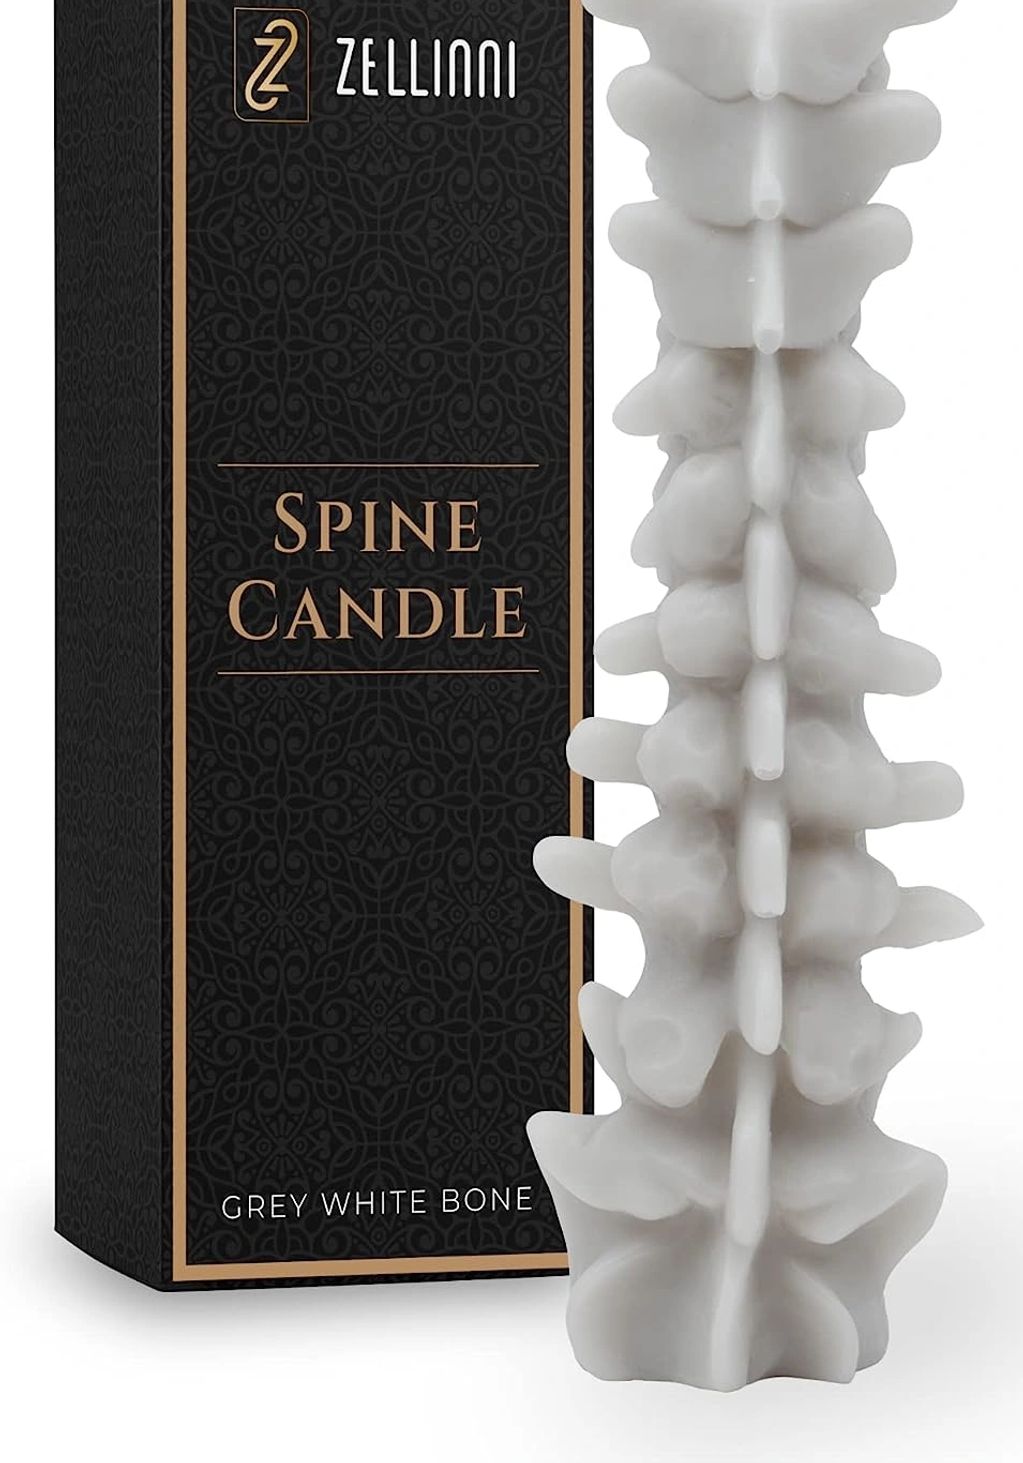 
Zellinni Spine Candle for Gothic Décor